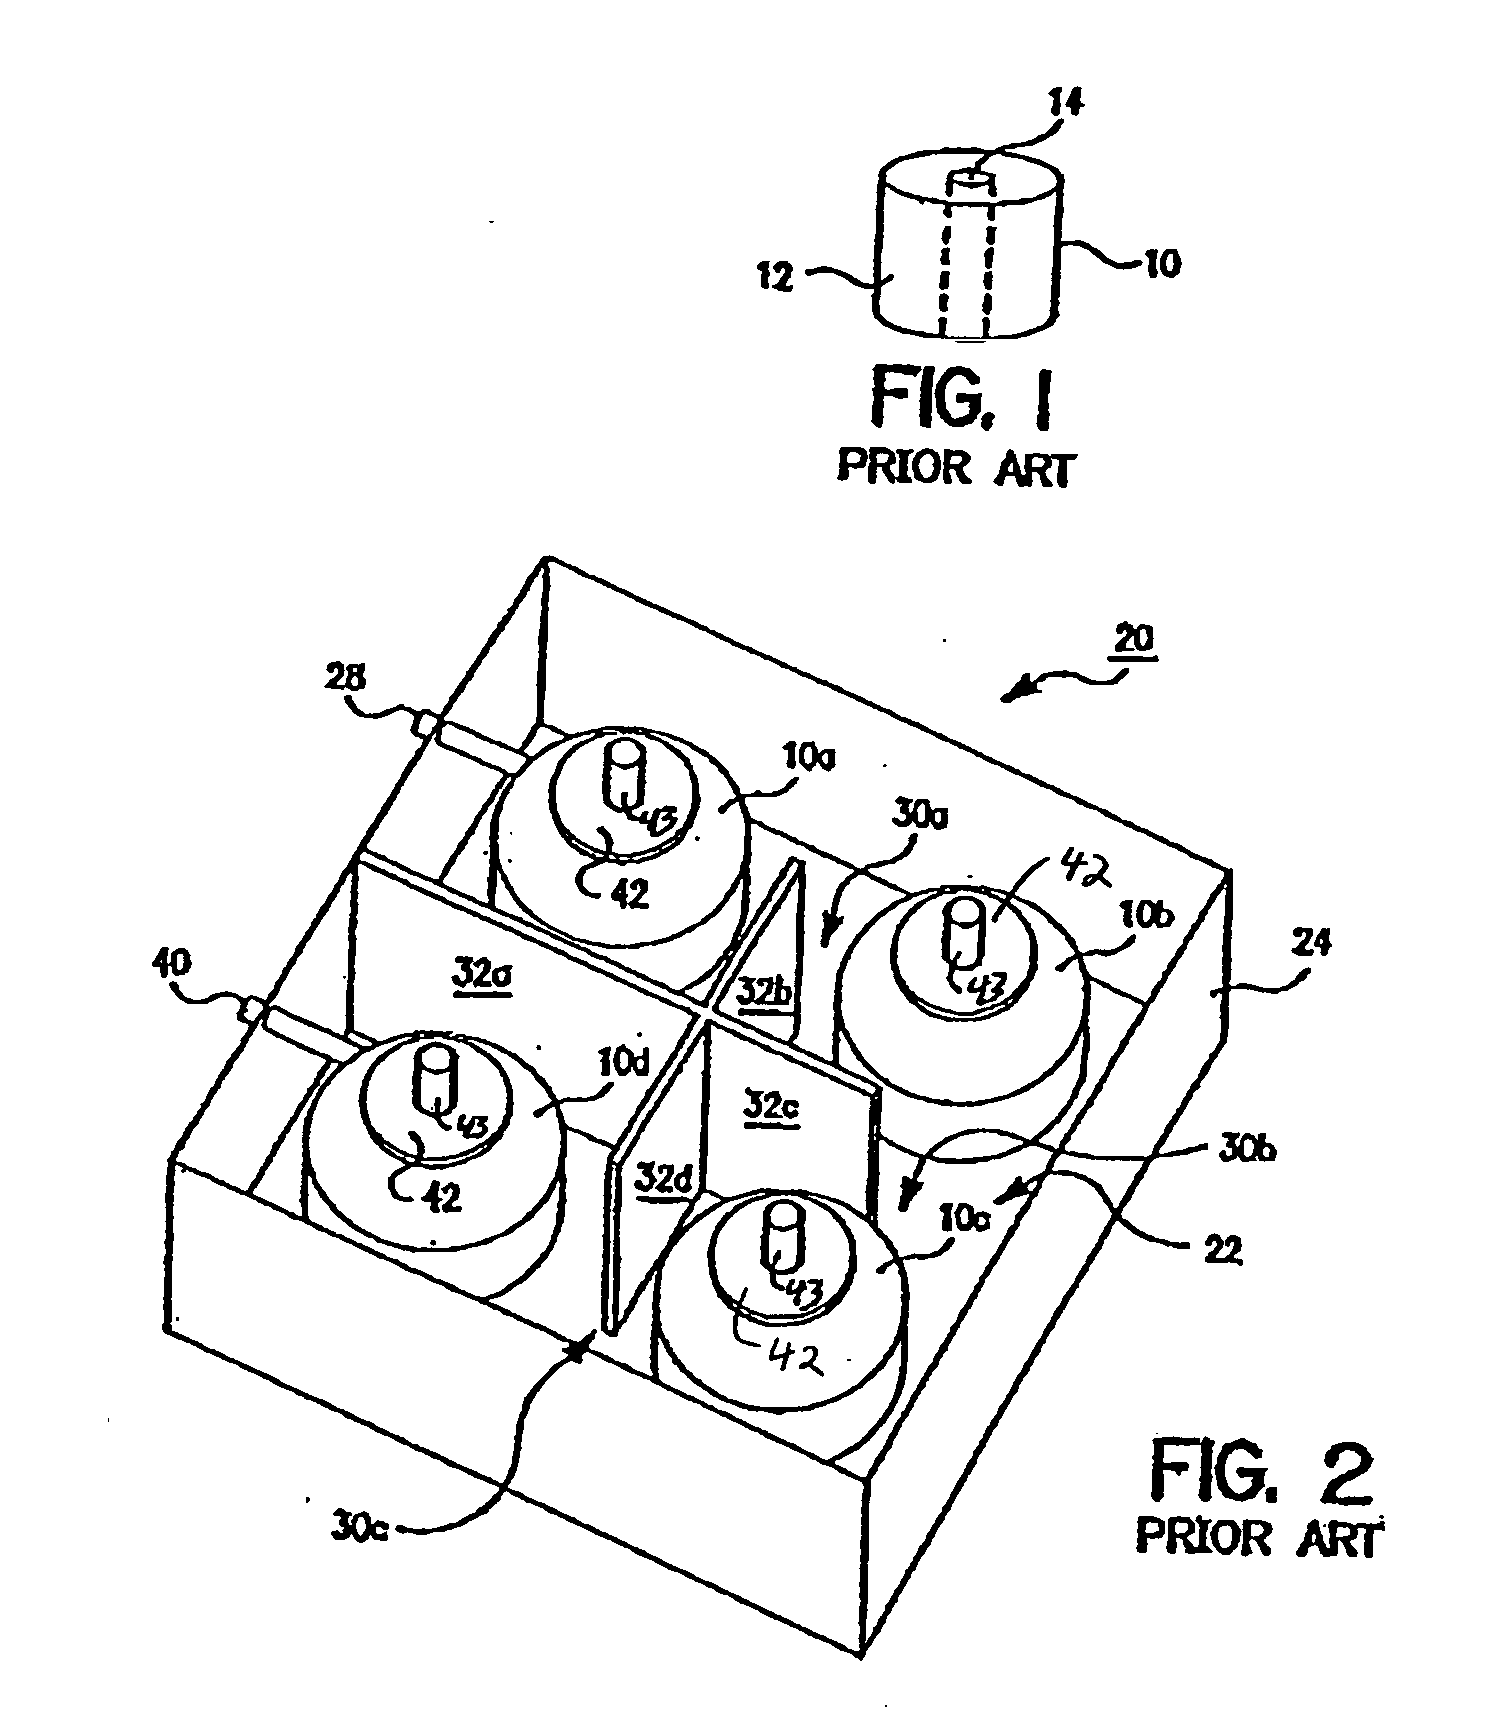 Slotted dielectric resonators and circuits with slotted dielectric resonators